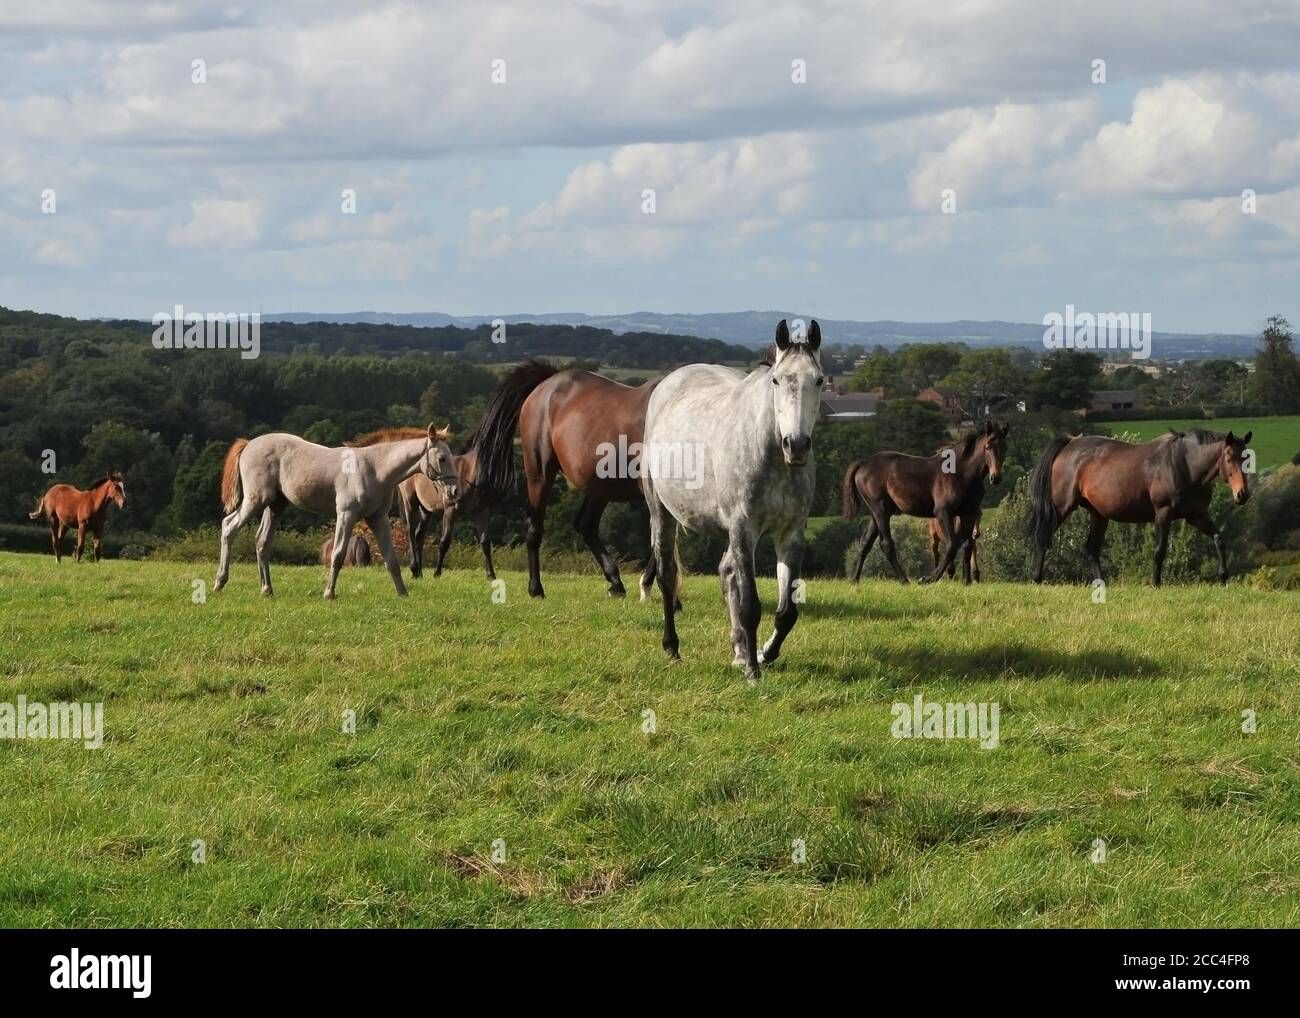 Mares and foals Equine Horses Stock Photo